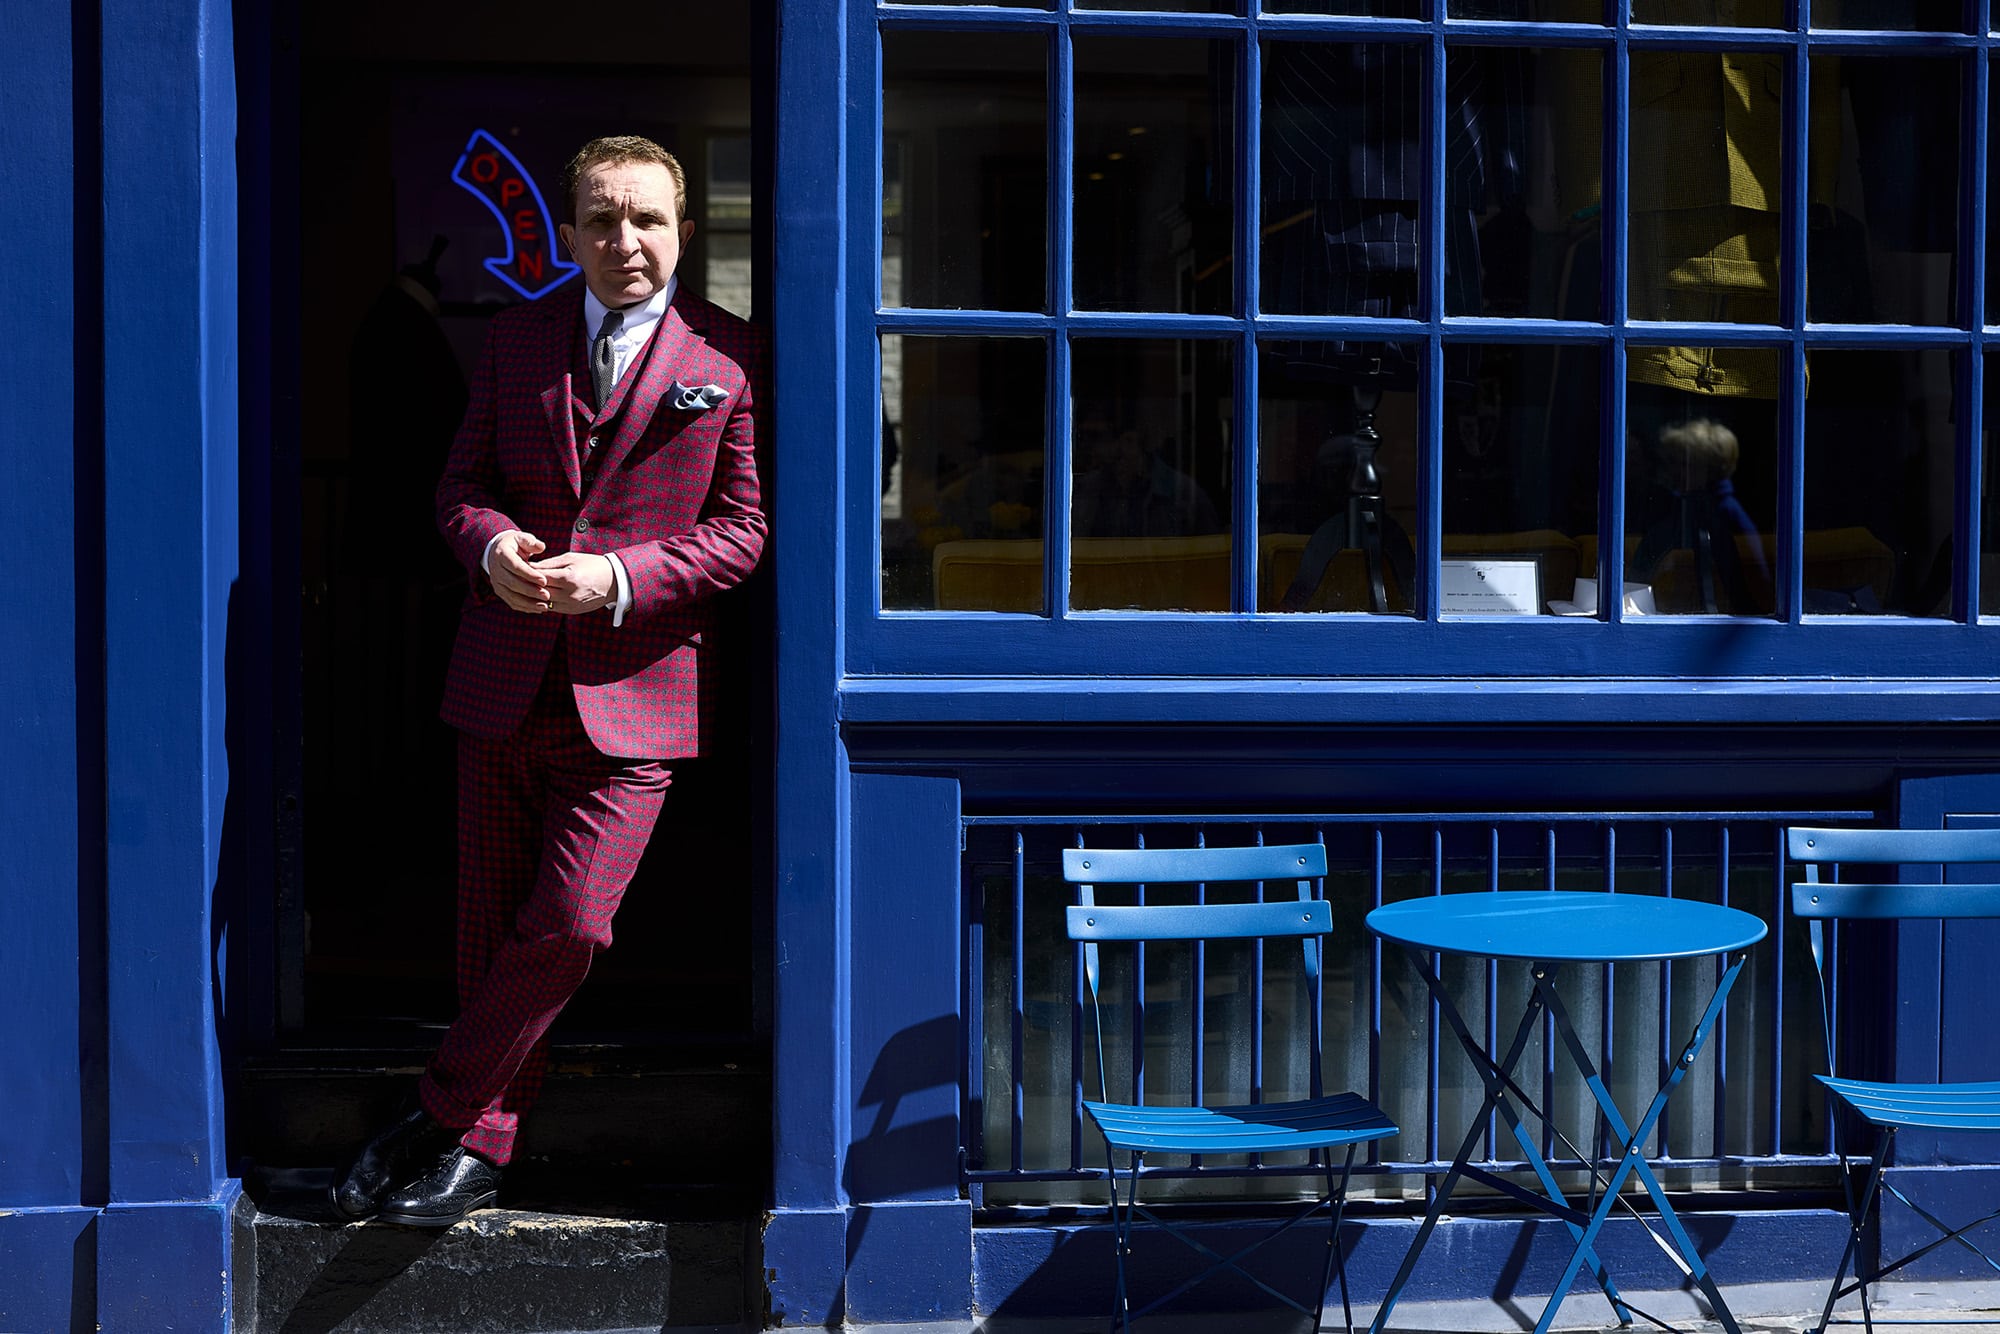 Eddie wears suit shirt, tie, and pocket square by Mark Powell. Shoes by Grenson. Glasses by Gentle Monster.